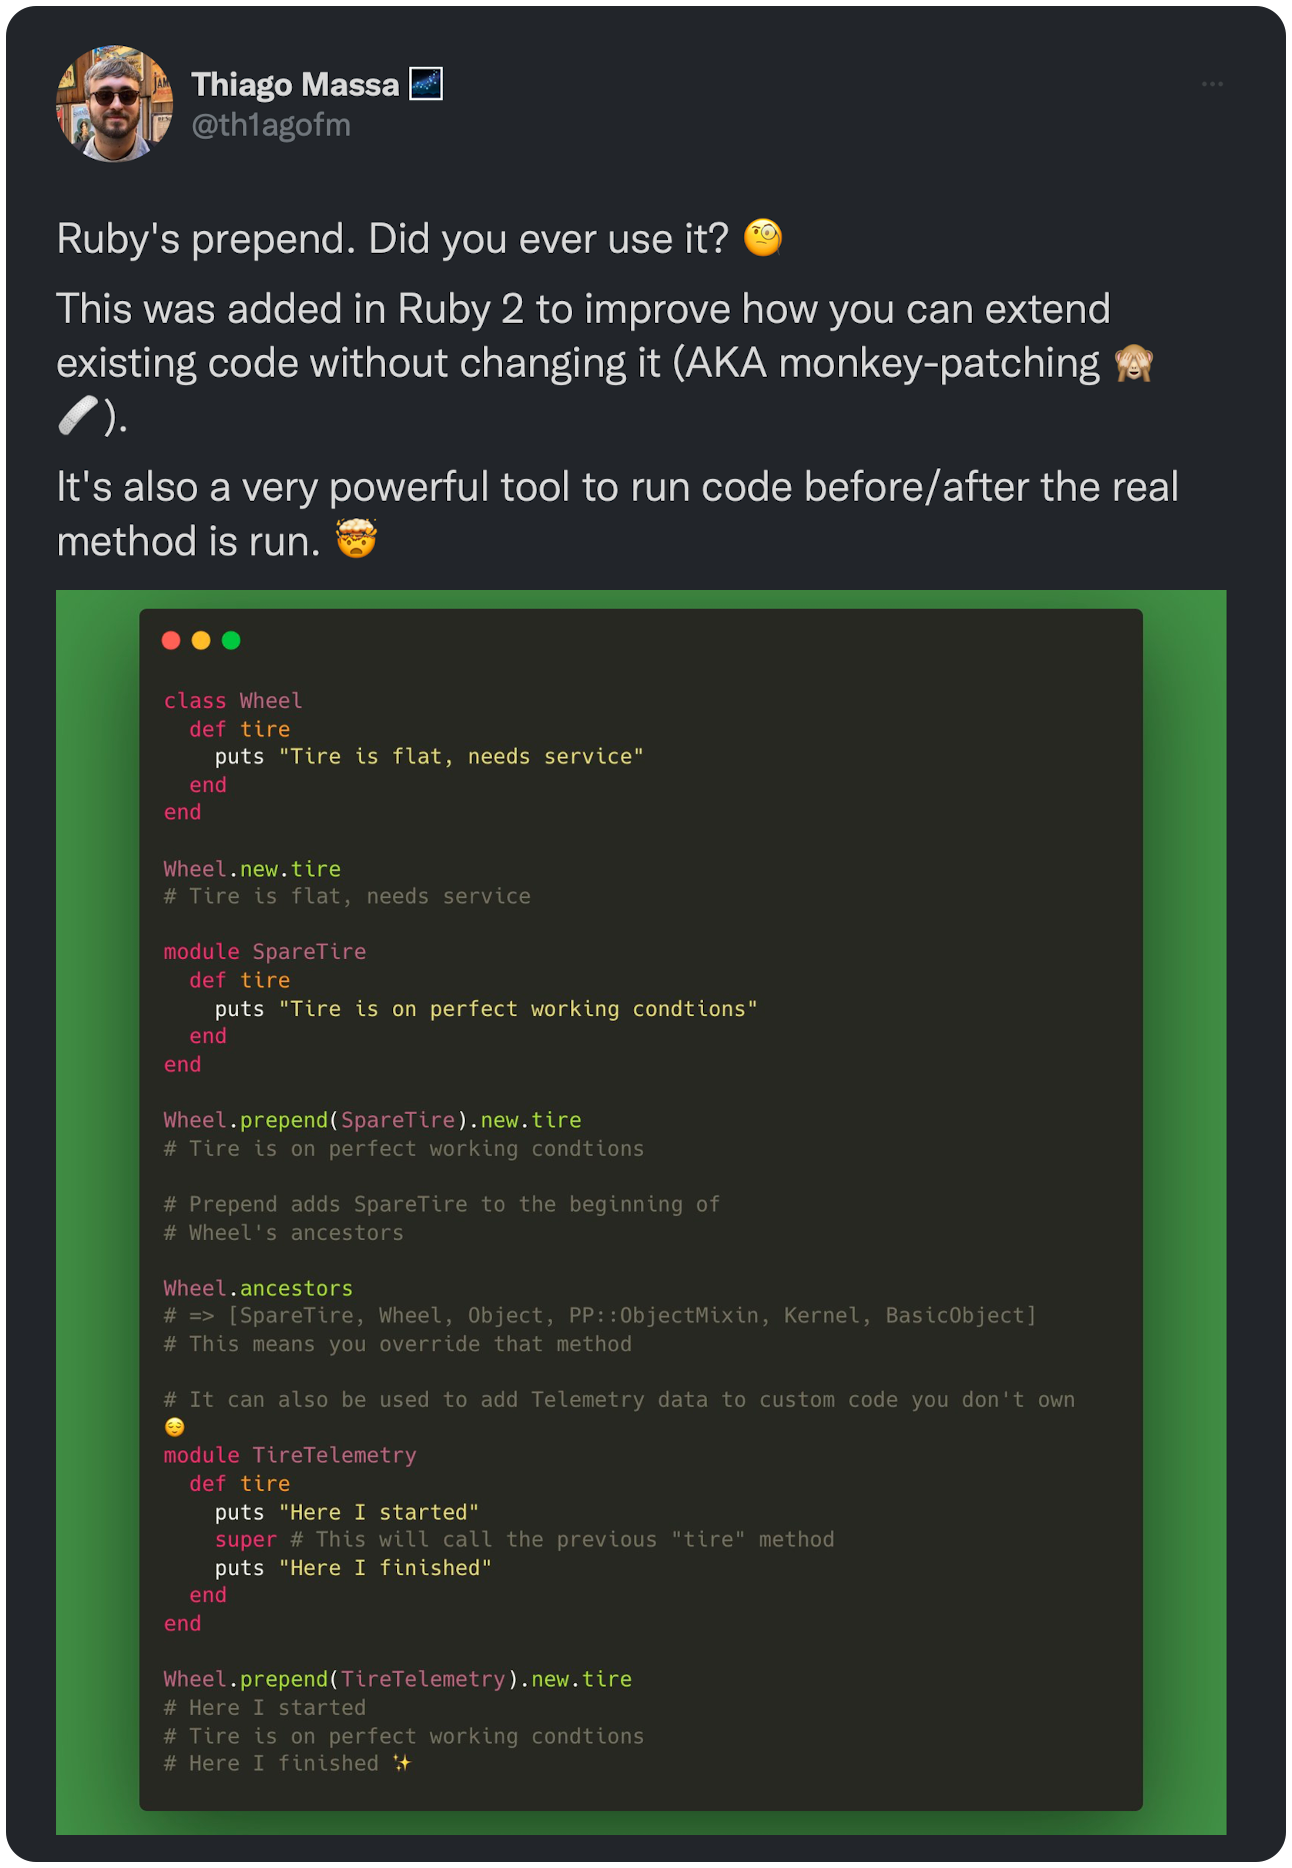 Ruby's prepend. Did you ever use it? 🧐 This was added in Ruby 2 to improve how you can extend existing code without changing it (AKA monkey-patching 🙈🩹). It's also a very powerful tool to run code before/after the real method is run. 🤯 Take a look 👇